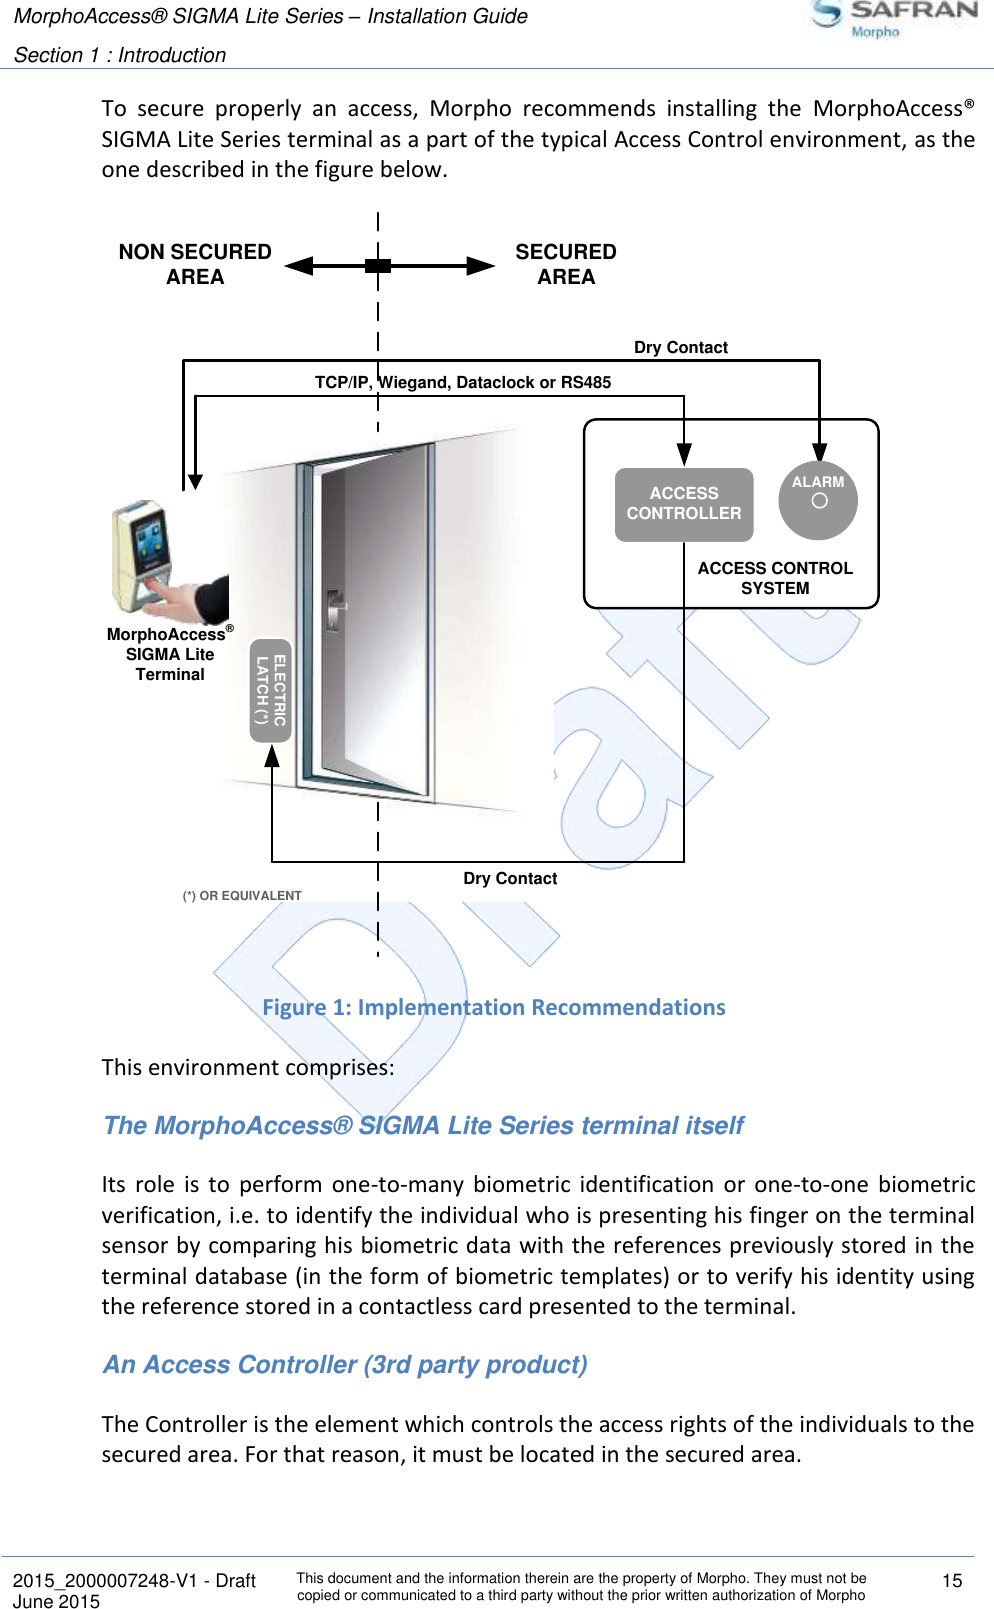 MorphoAccess® SIGMA Lite Series – Installation Guide  Section 1 : Introduction   2015_2000007248-V1 - Draft This document and the information therein are the property of Morpho. They must not be copied or communicated to a third party without the prior written authorization of Morpho 15 June 2015   To  secure  properly  an  access,  Morpho  recommends  installing  the  MorphoAccess® SIGMA Lite Series terminal as a part of the typical Access Control environment, as the one described in the figure below.  Figure 1: Implementation Recommendations This environment comprises: The MorphoAccess® SIGMA Lite Series terminal itself Its  role  is  to  perform  one-to-many  biometric  identification  or  one-to-one  biometric verification, i.e. to identify the individual who is presenting his finger on the terminal sensor by comparing his biometric data with the references previously stored in the terminal database (in the form of biometric templates) or to verify his identity using the reference stored in a contactless card presented to the terminal. An Access Controller (3rd party product) The Controller is the element which controls the access rights of the individuals to the secured area. For that reason, it must be located in the secured area. ACCESS CONTROLSYSTEM(*) OR EQUIVALENTNON SECUREDAREAACCESS CONTROLLERTCP/IP, Wiegand, Dataclock or RS485ELECTRICLATCH (*)SECUREDAREADry ContactMorphoAccess® SIGMA Lite TerminalDry ContactALARM